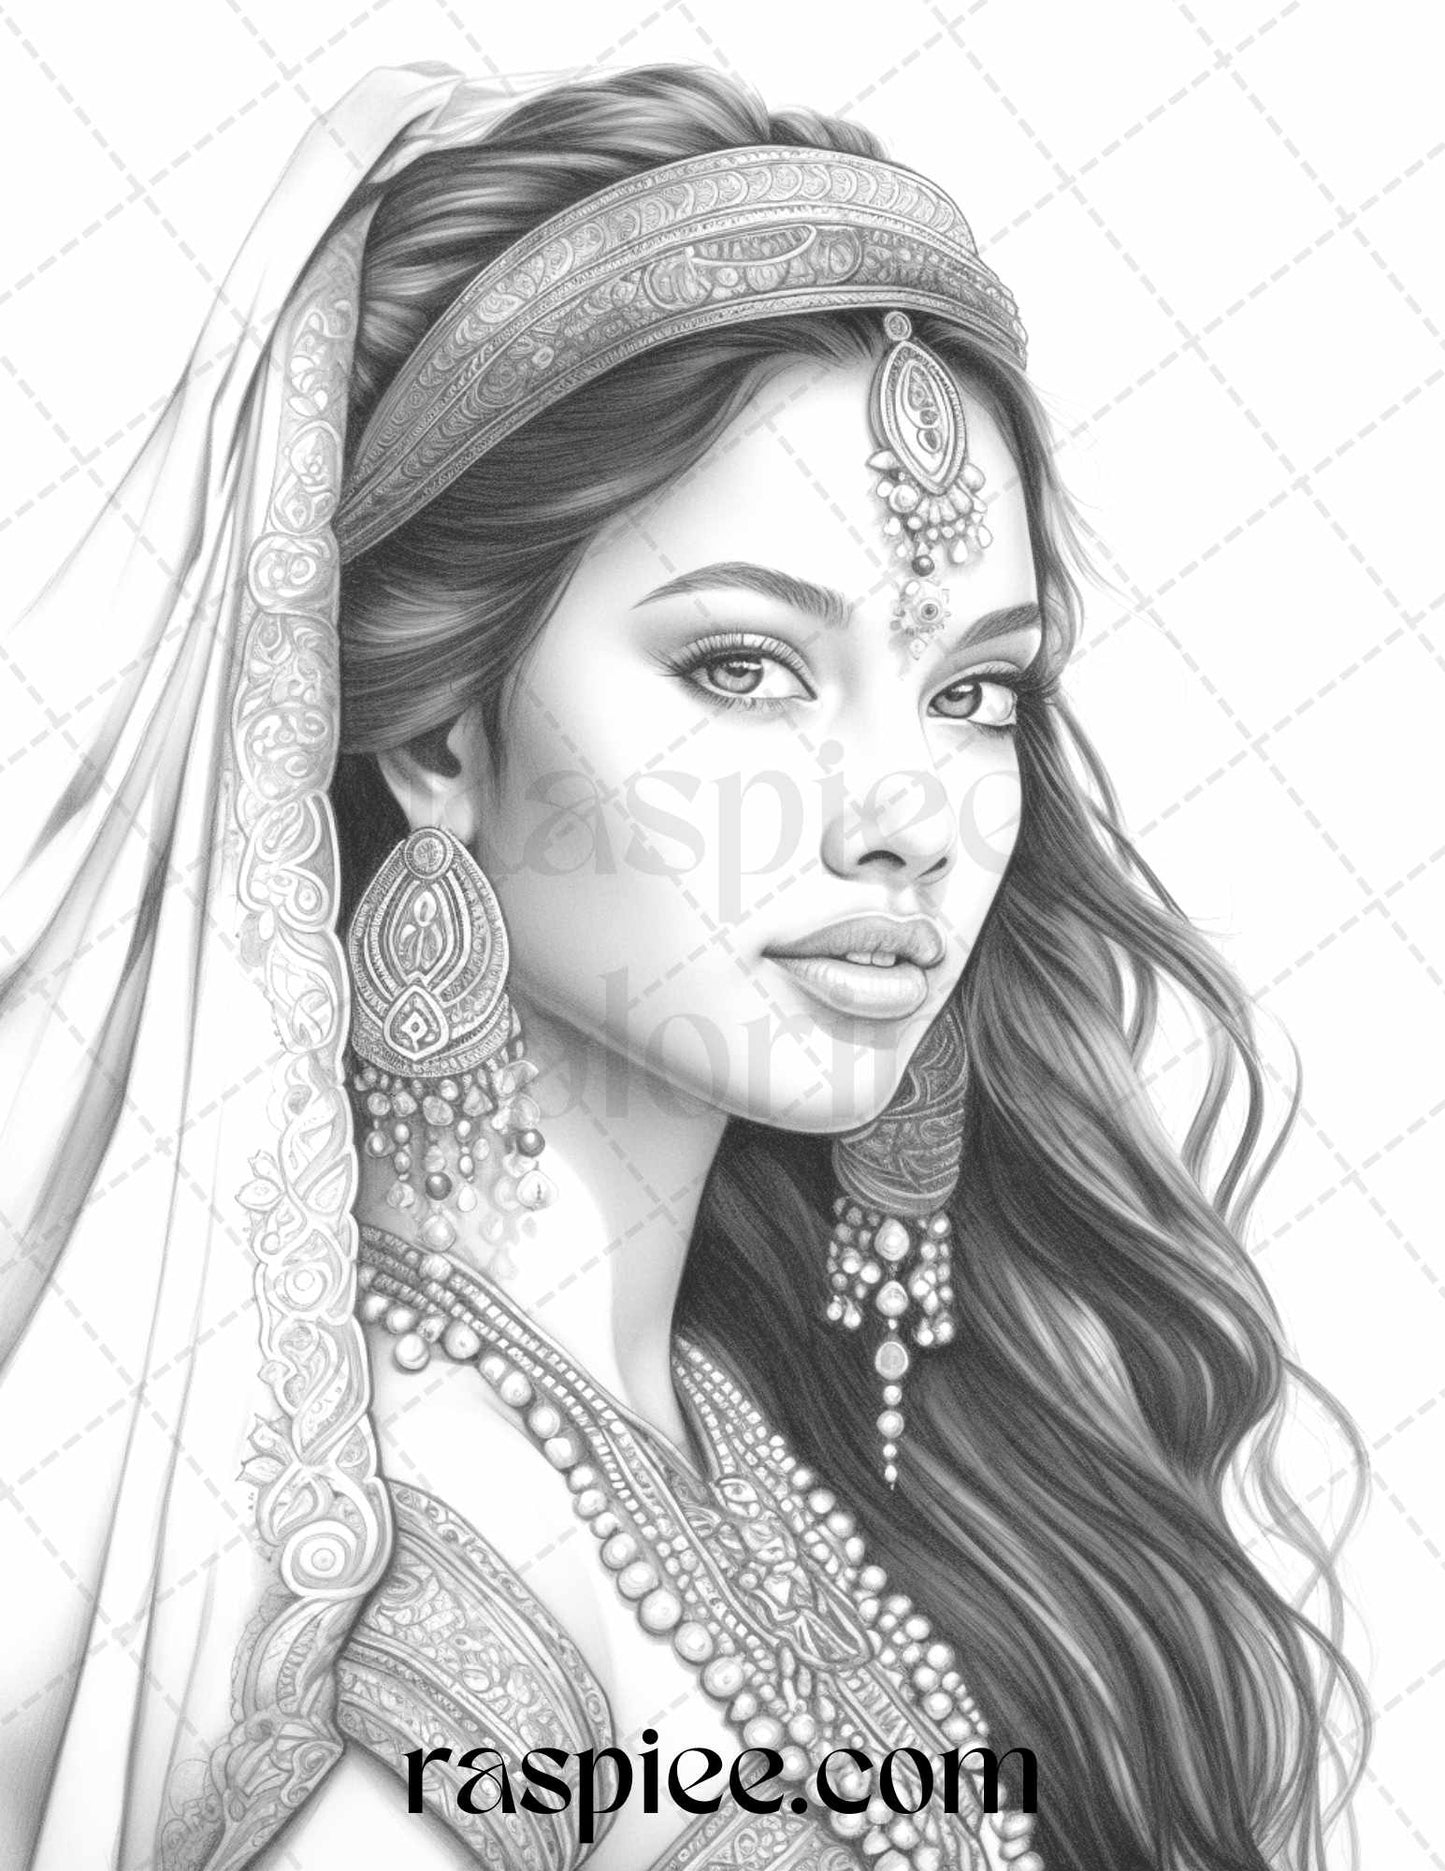 50 Beautiful Indian Women Grayscale Coloring Pages for Adults, Printable PDF File Instant Download